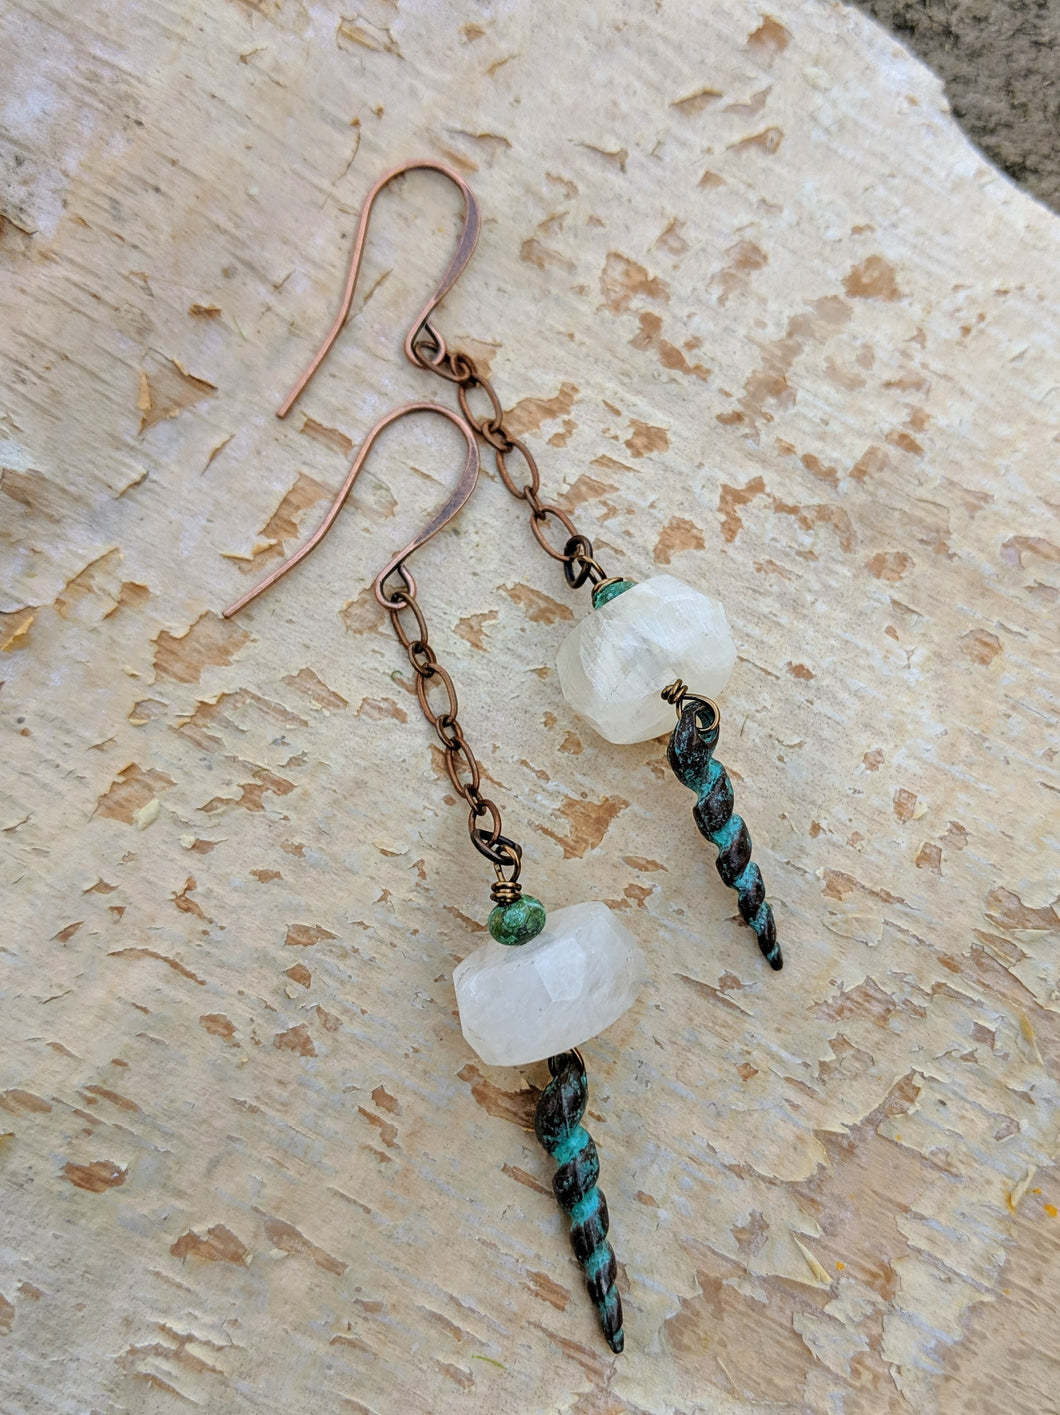 Moonstone and Verdigris Spiral Shell Earrings - Minxes' Trinkets